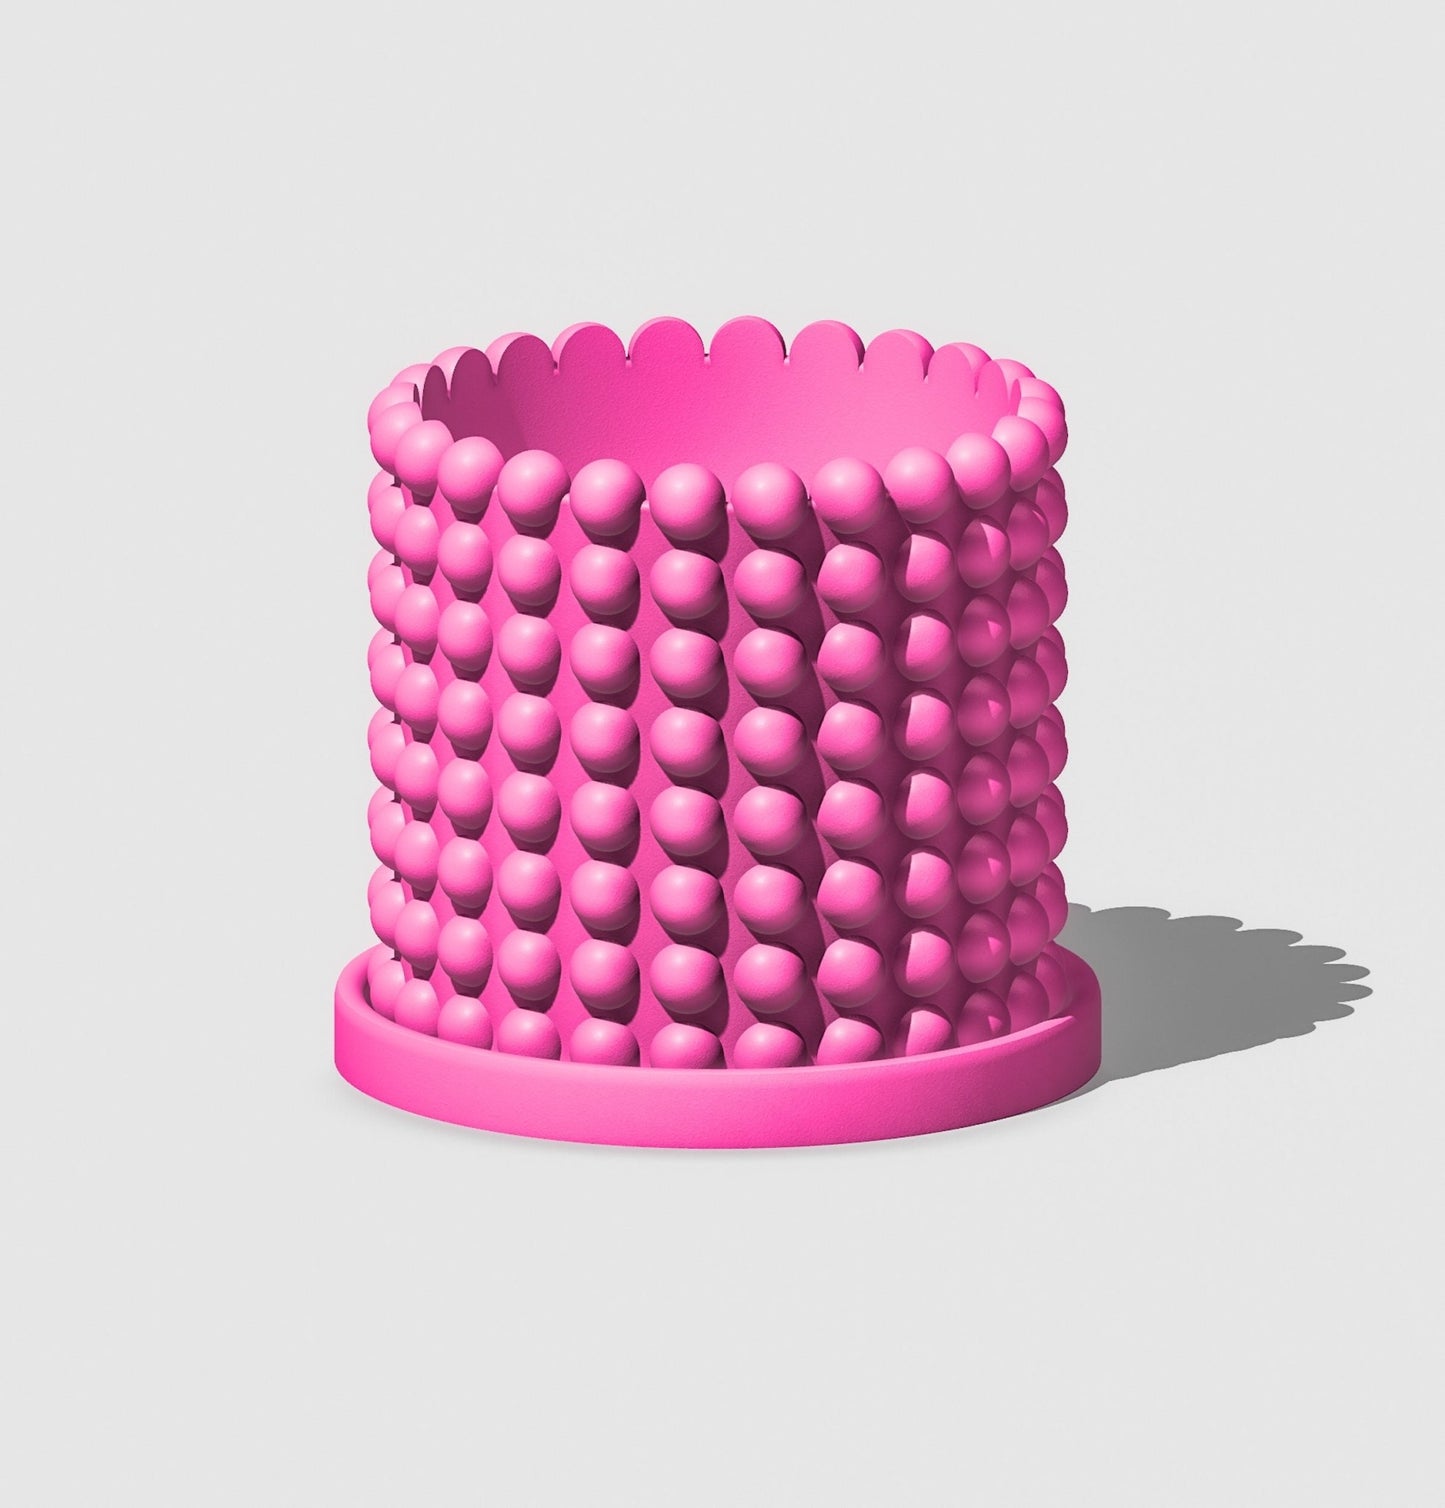 Pink Modern planter with drainage 'RING OF PEARLS DESIGN' - Rosebud HomeGoods Pink 4 Inch - No Tray MODERN HOME GOOD